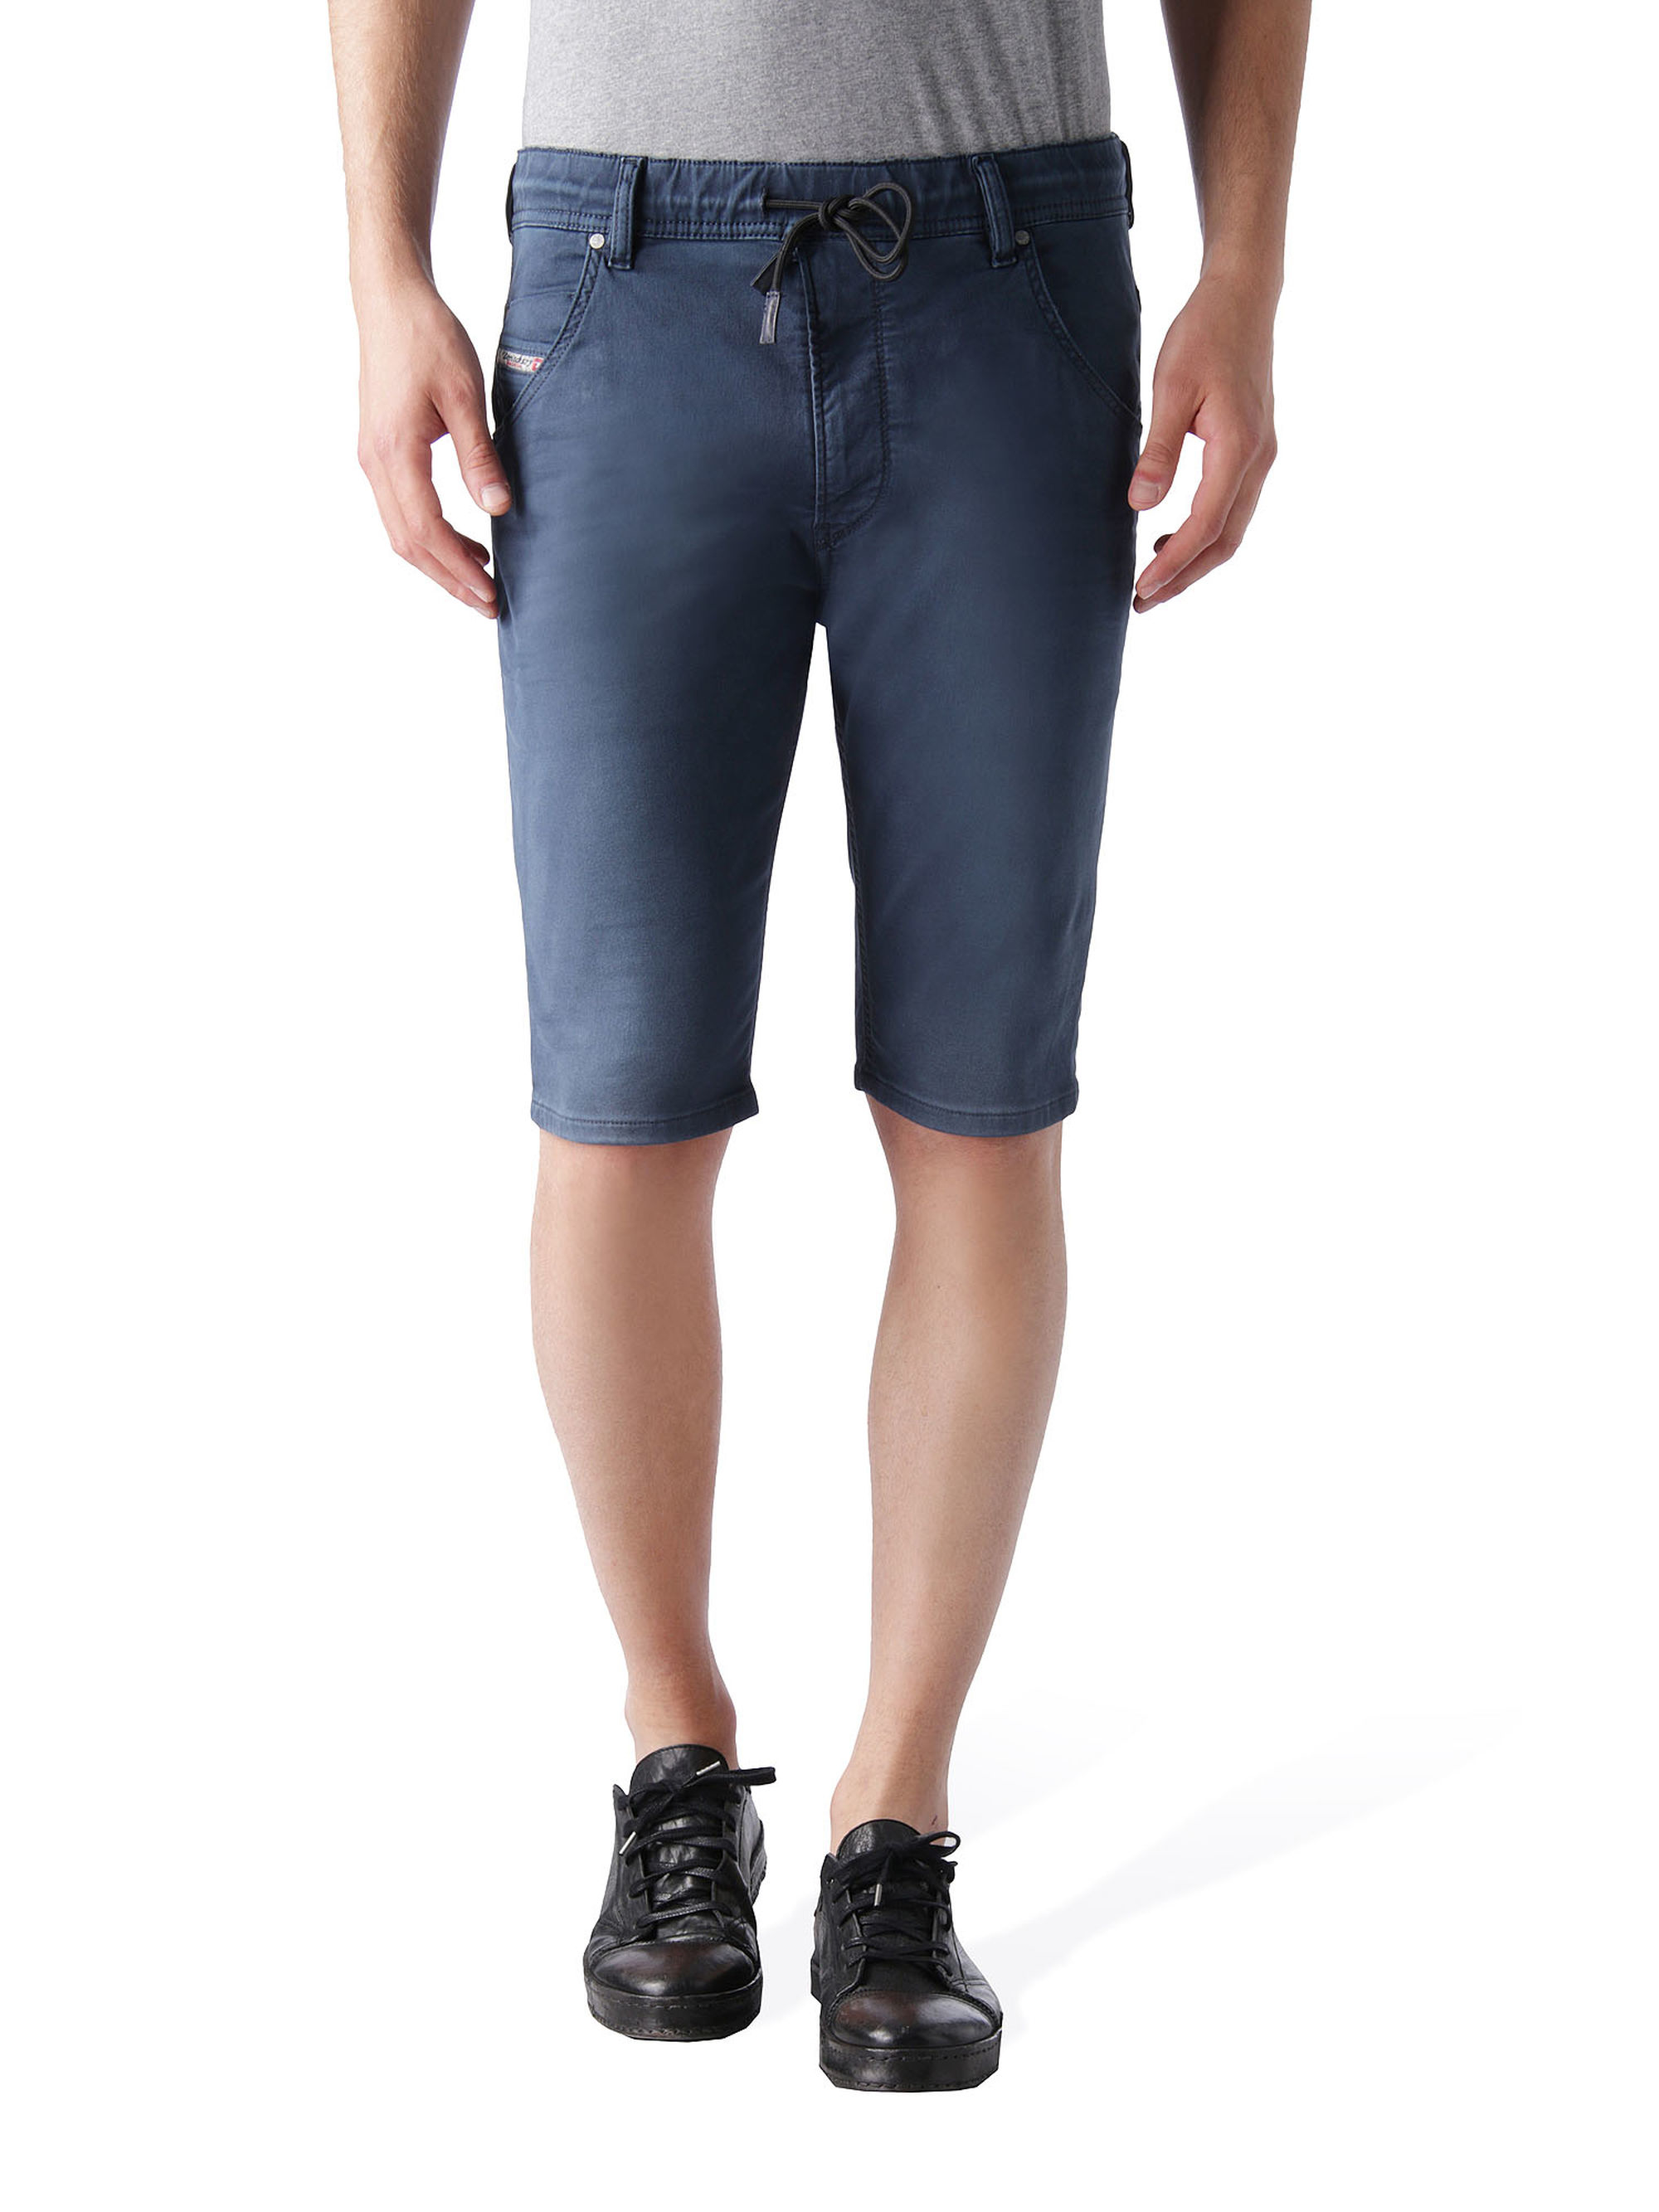 Diesel Jogg Jeans Shorts Norway, SAVE 57% - abaroadrive.com